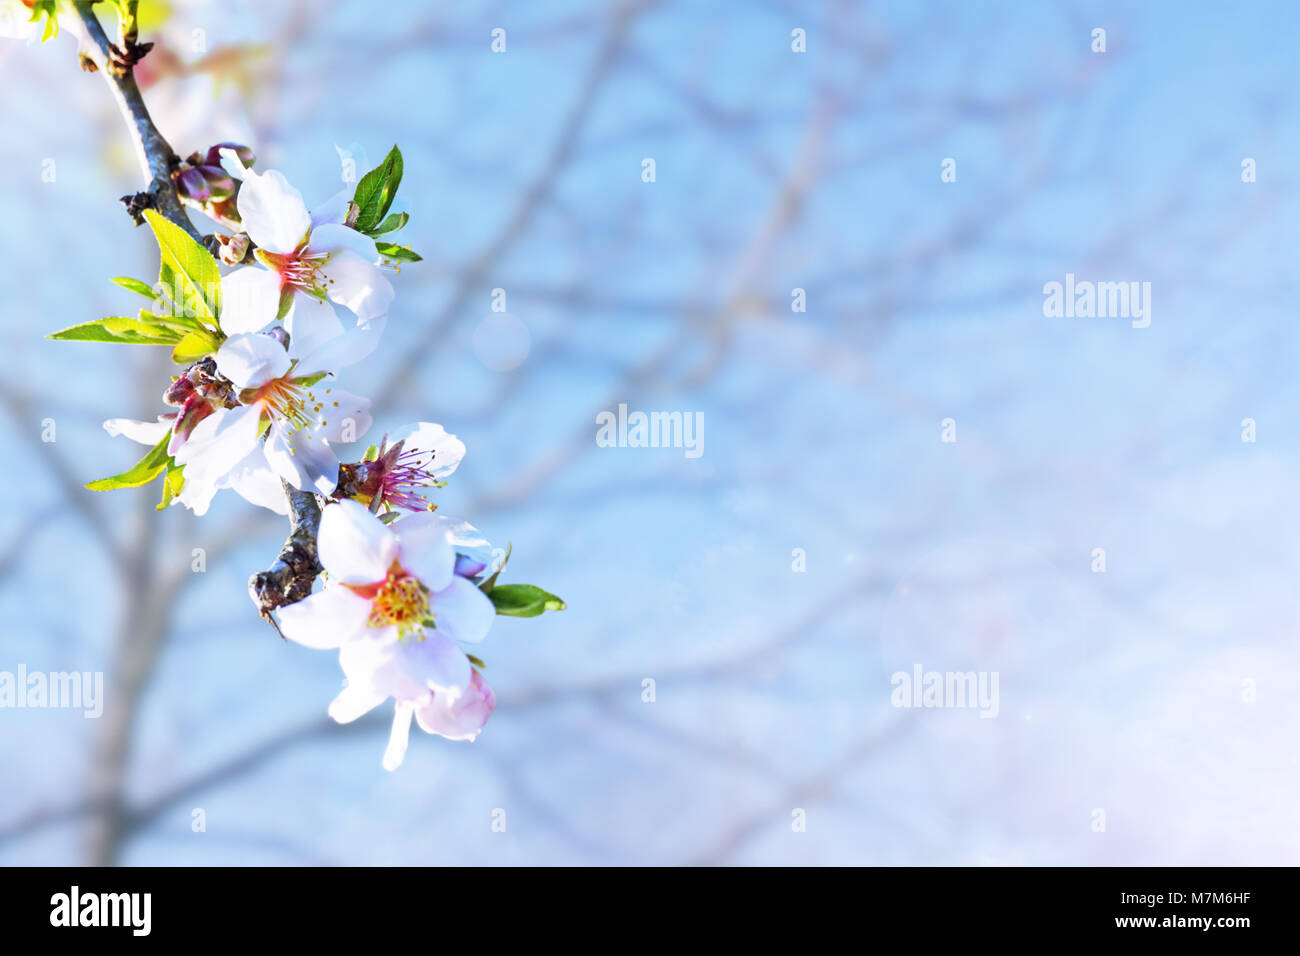 Almond blossom. Springtime tree branch with pink flowers and leaves. Stock Photo